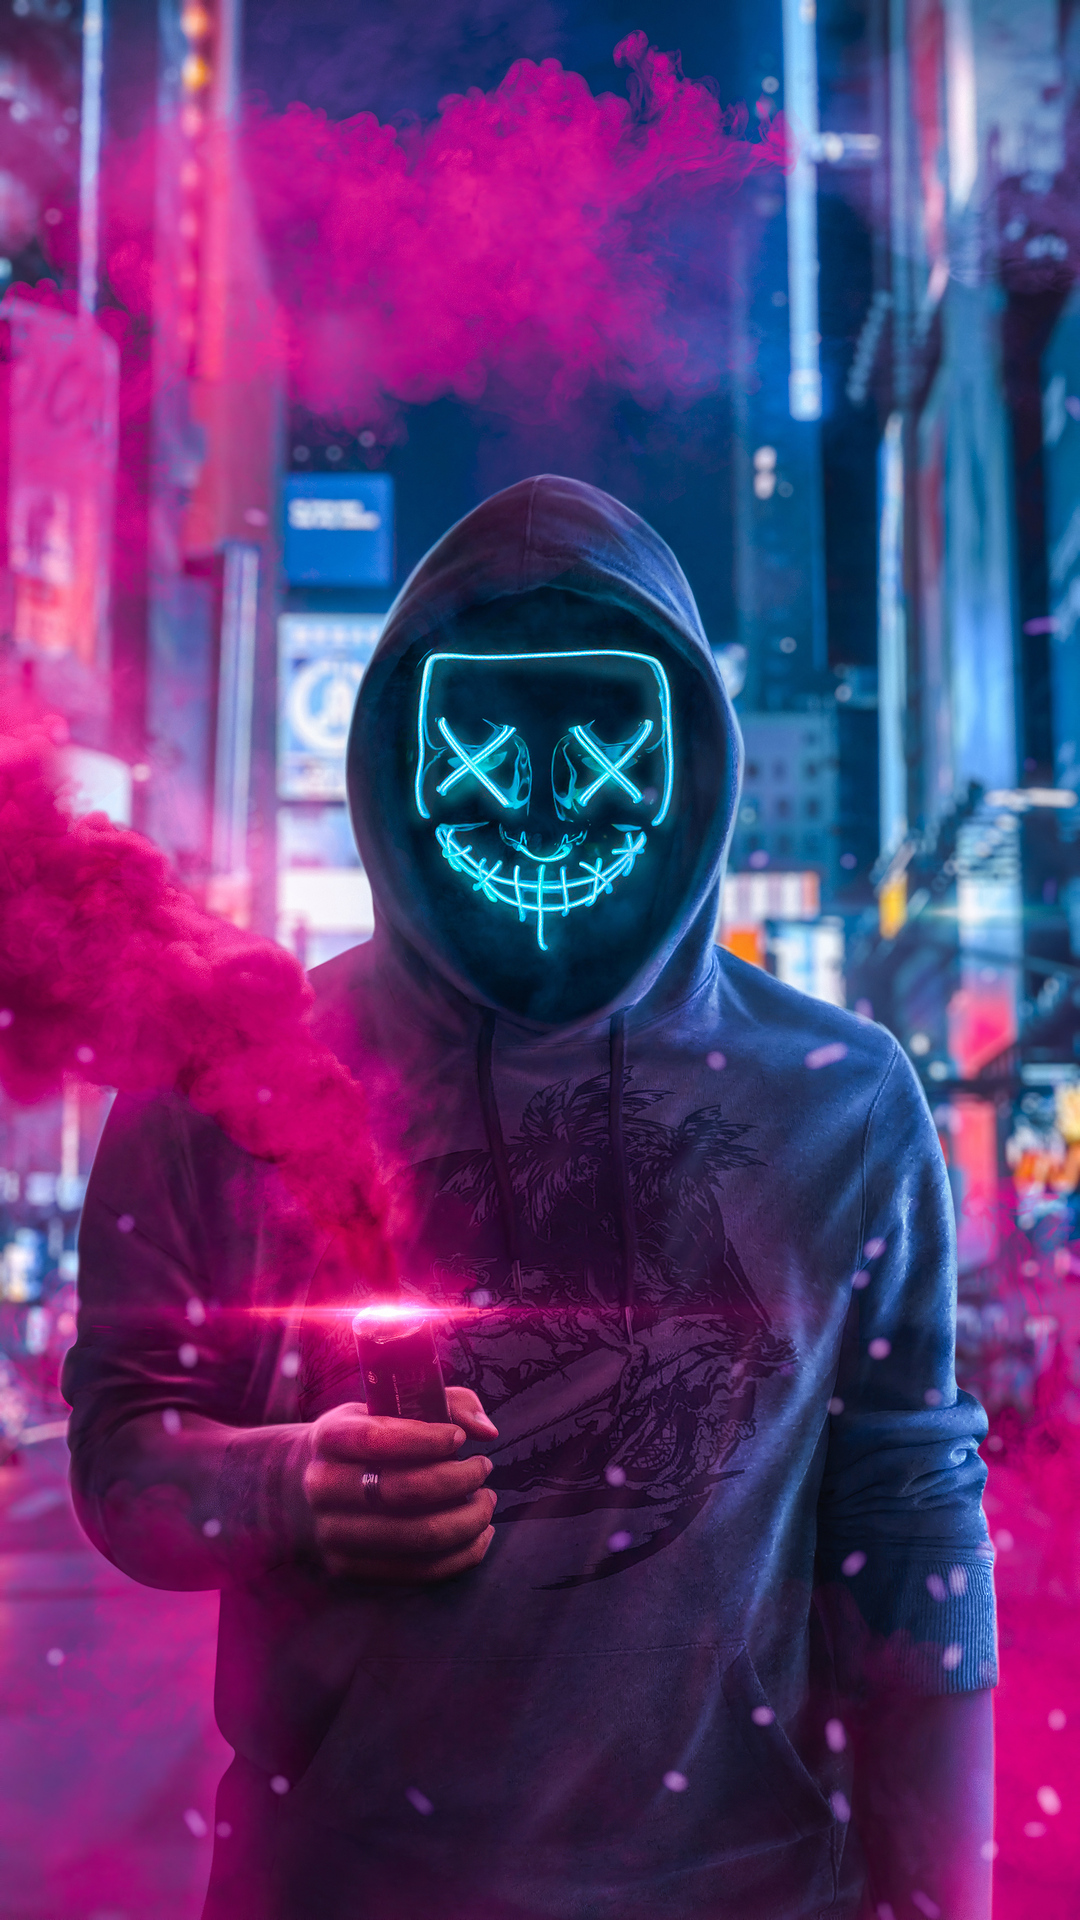 Mask Guy With Smoke Bomb In Hand 4k iPhone 6s, 6 Plus, Pixel xl , One Plus 3t, 5 HD 4k Wallpaper, Image, Background, Photo and Picture